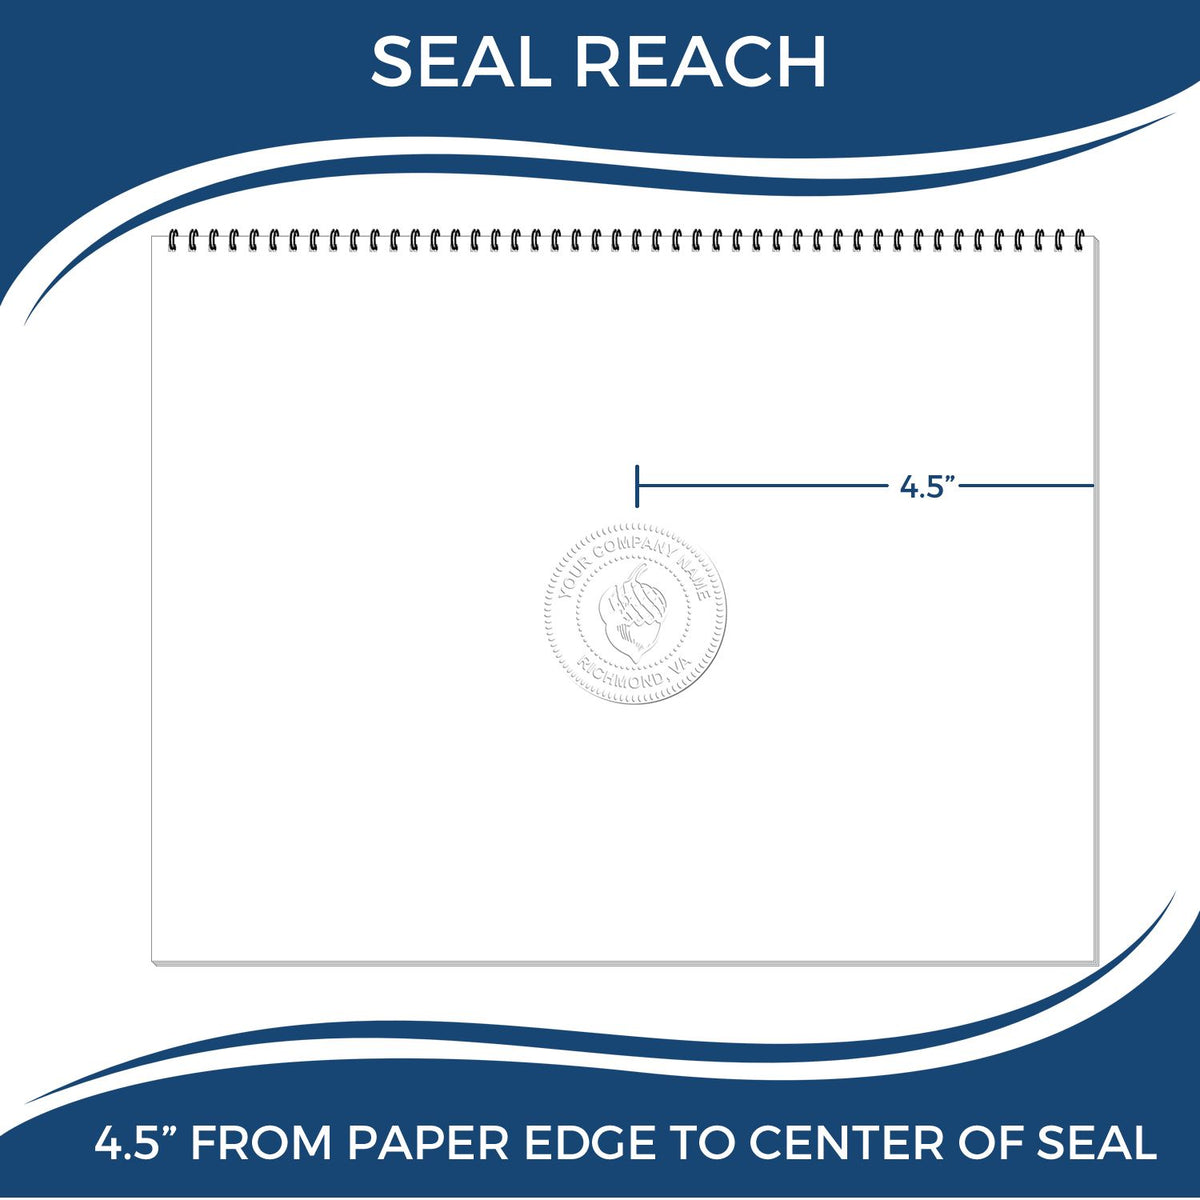 An infographic showing the seal reach which is represented by a ruler and a miniature seal image of the Extended Long Reach Alaska Architect Seal Embosser